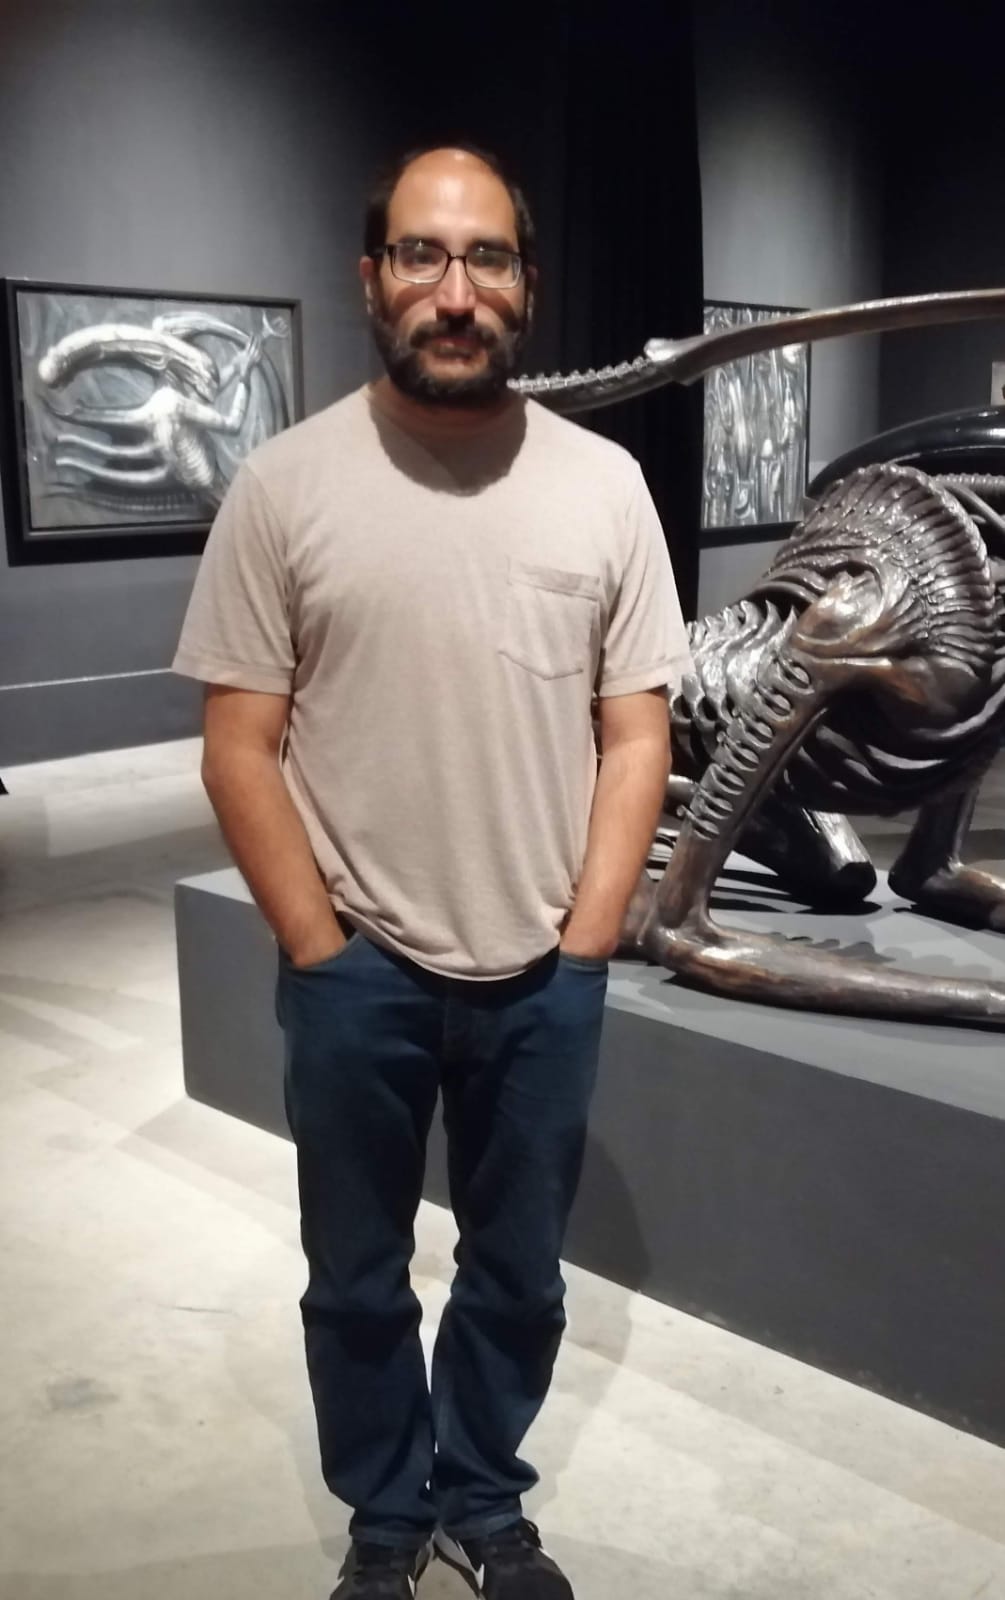 Me, at a Giger exhibit